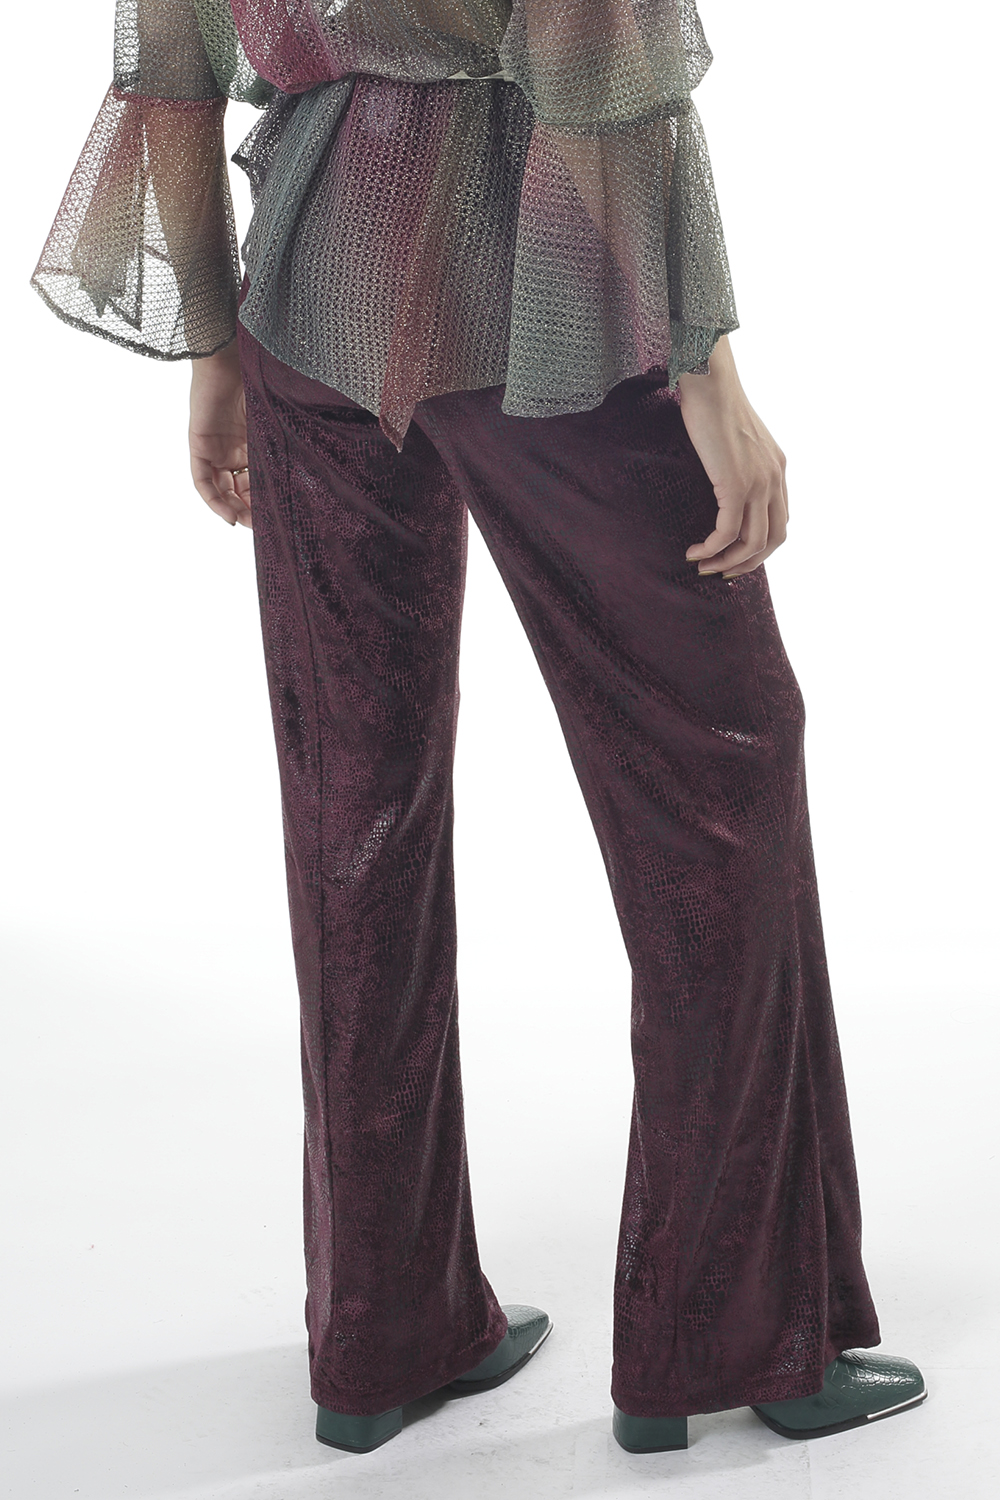 STYLE D66: MIRA - Sequin and embroidery trousers tailormade